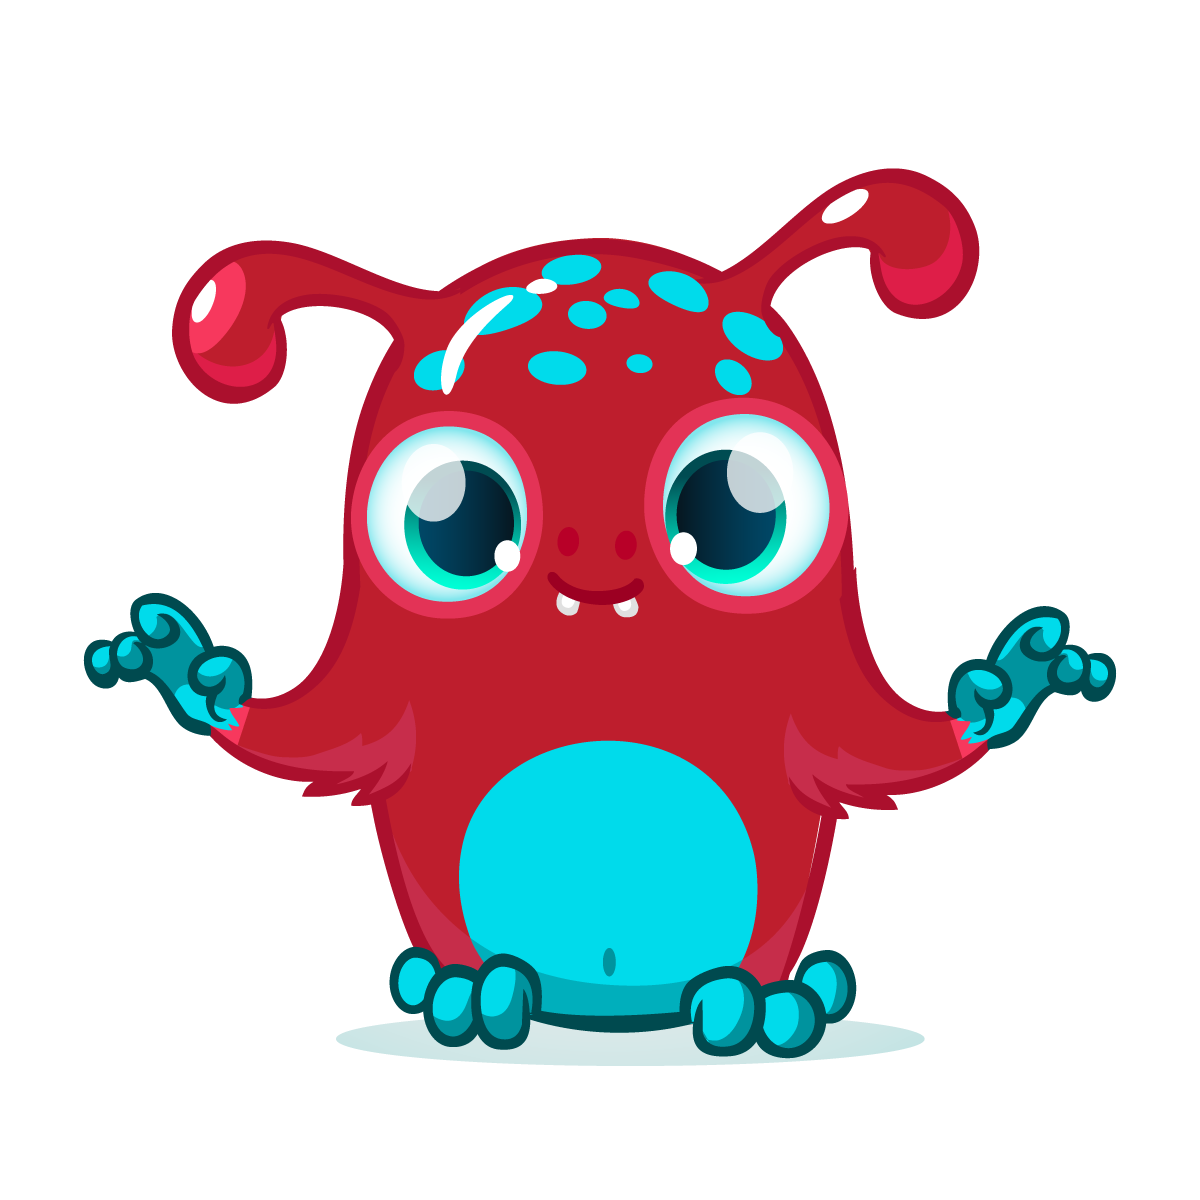 Bloody Slime character